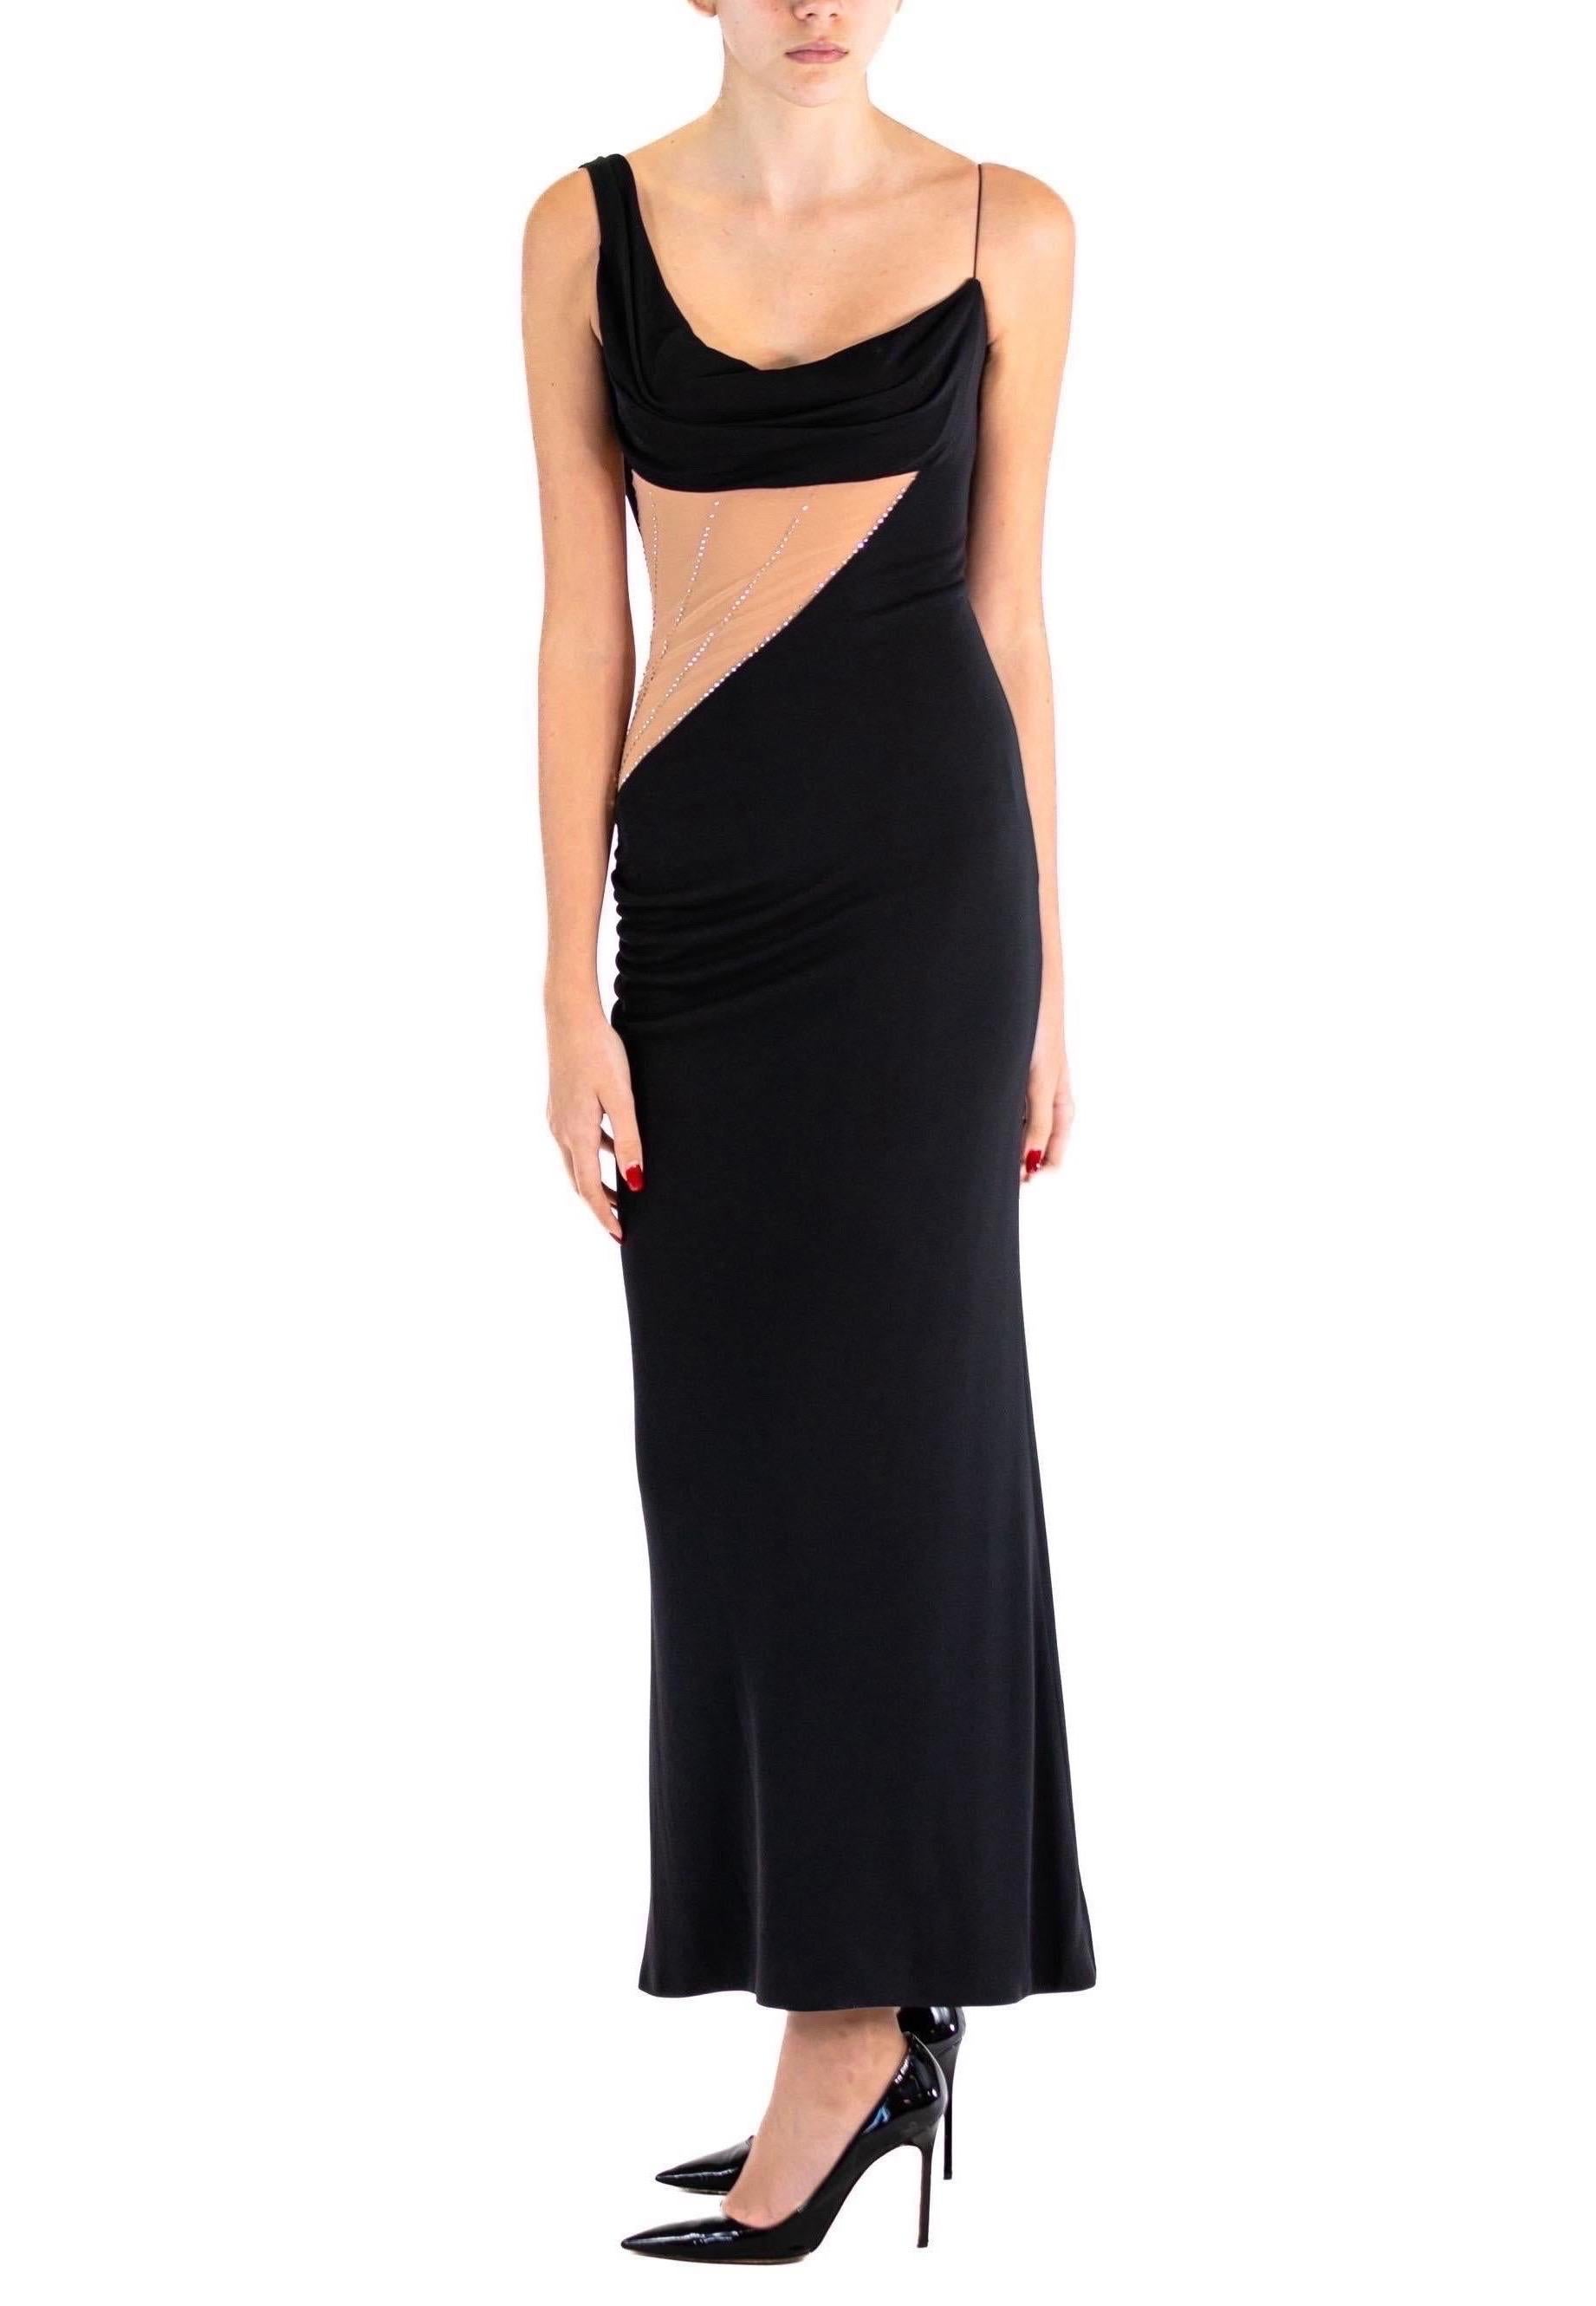 2000S JIKI Black Slinky Rayon Jersey One Shoulder Gown With Crystal Studded Nud For Sale 2